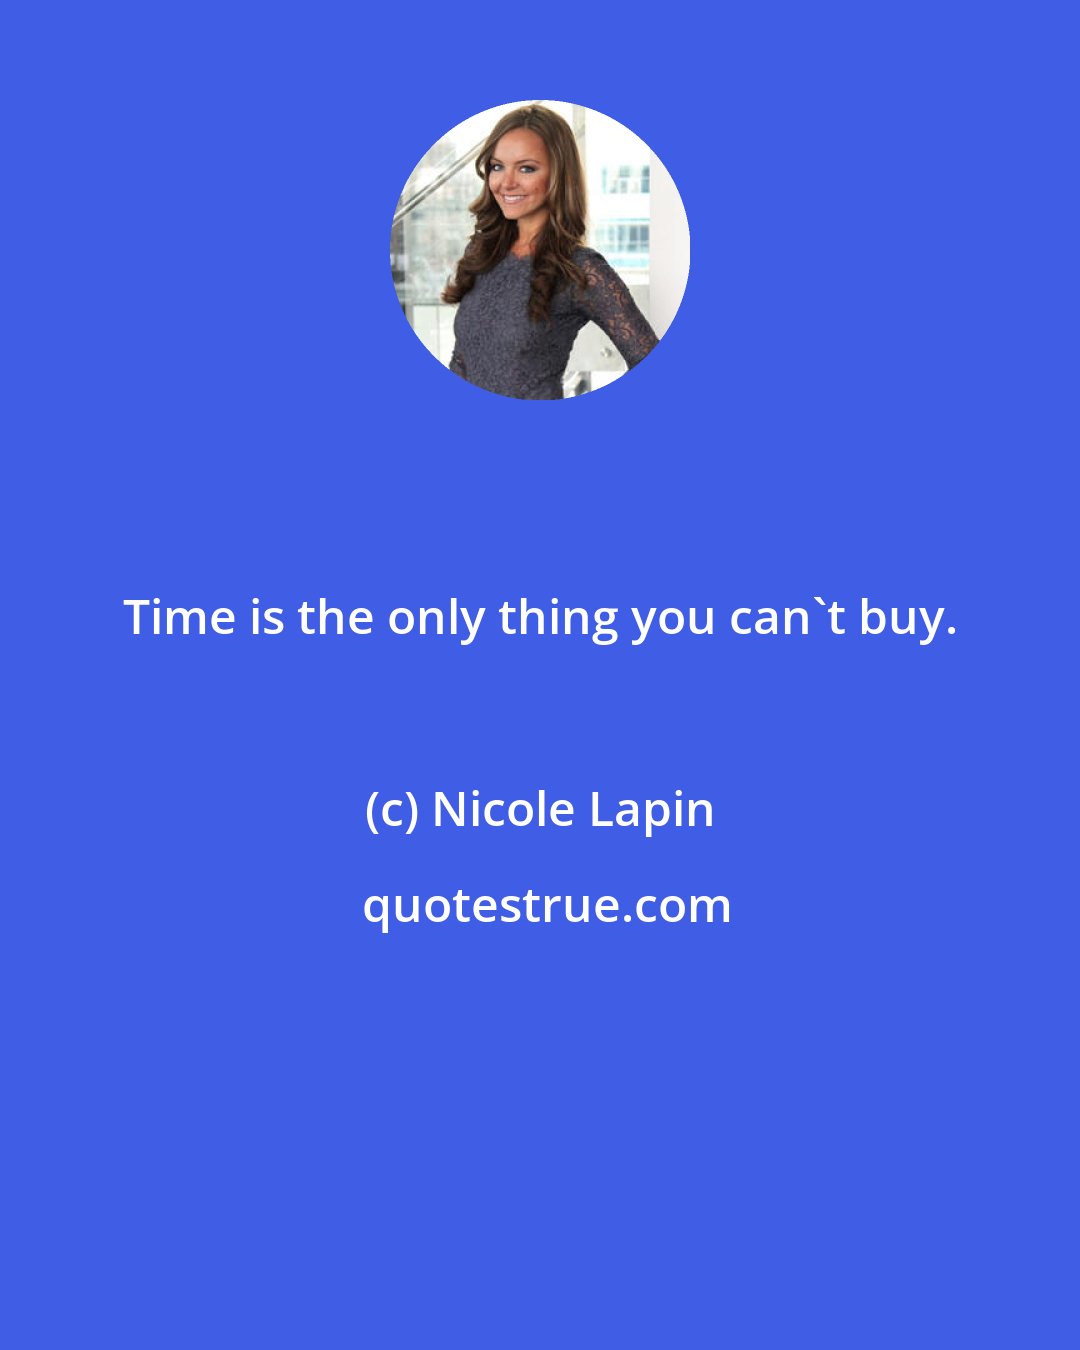 Nicole Lapin: Time is the only thing you can't buy.